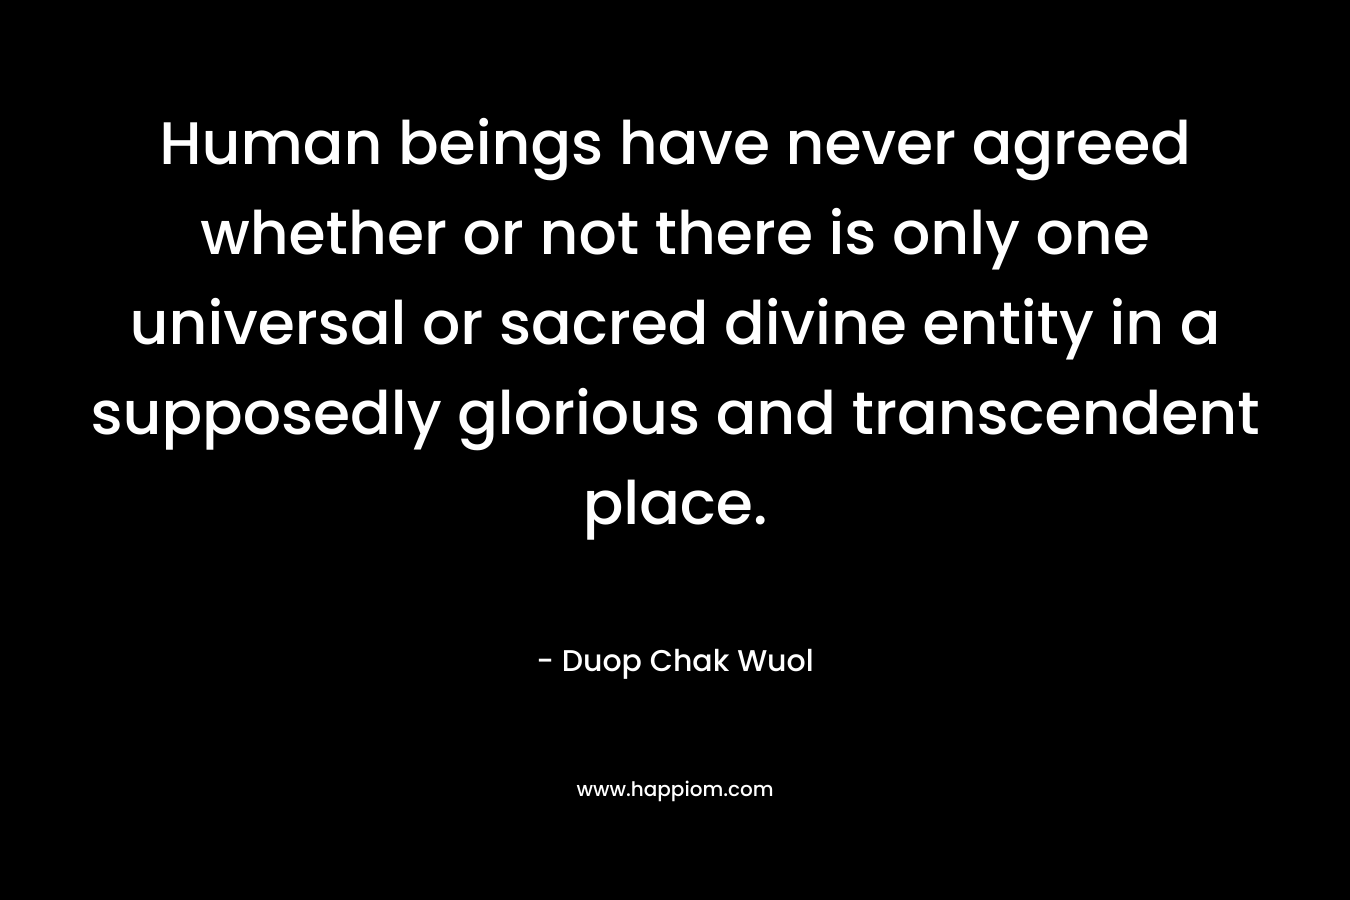 Human beings have never agreed whether or not there is only one universal or sacred divine entity in a supposedly glorious and transcendent place. – Duop Chak Wuol